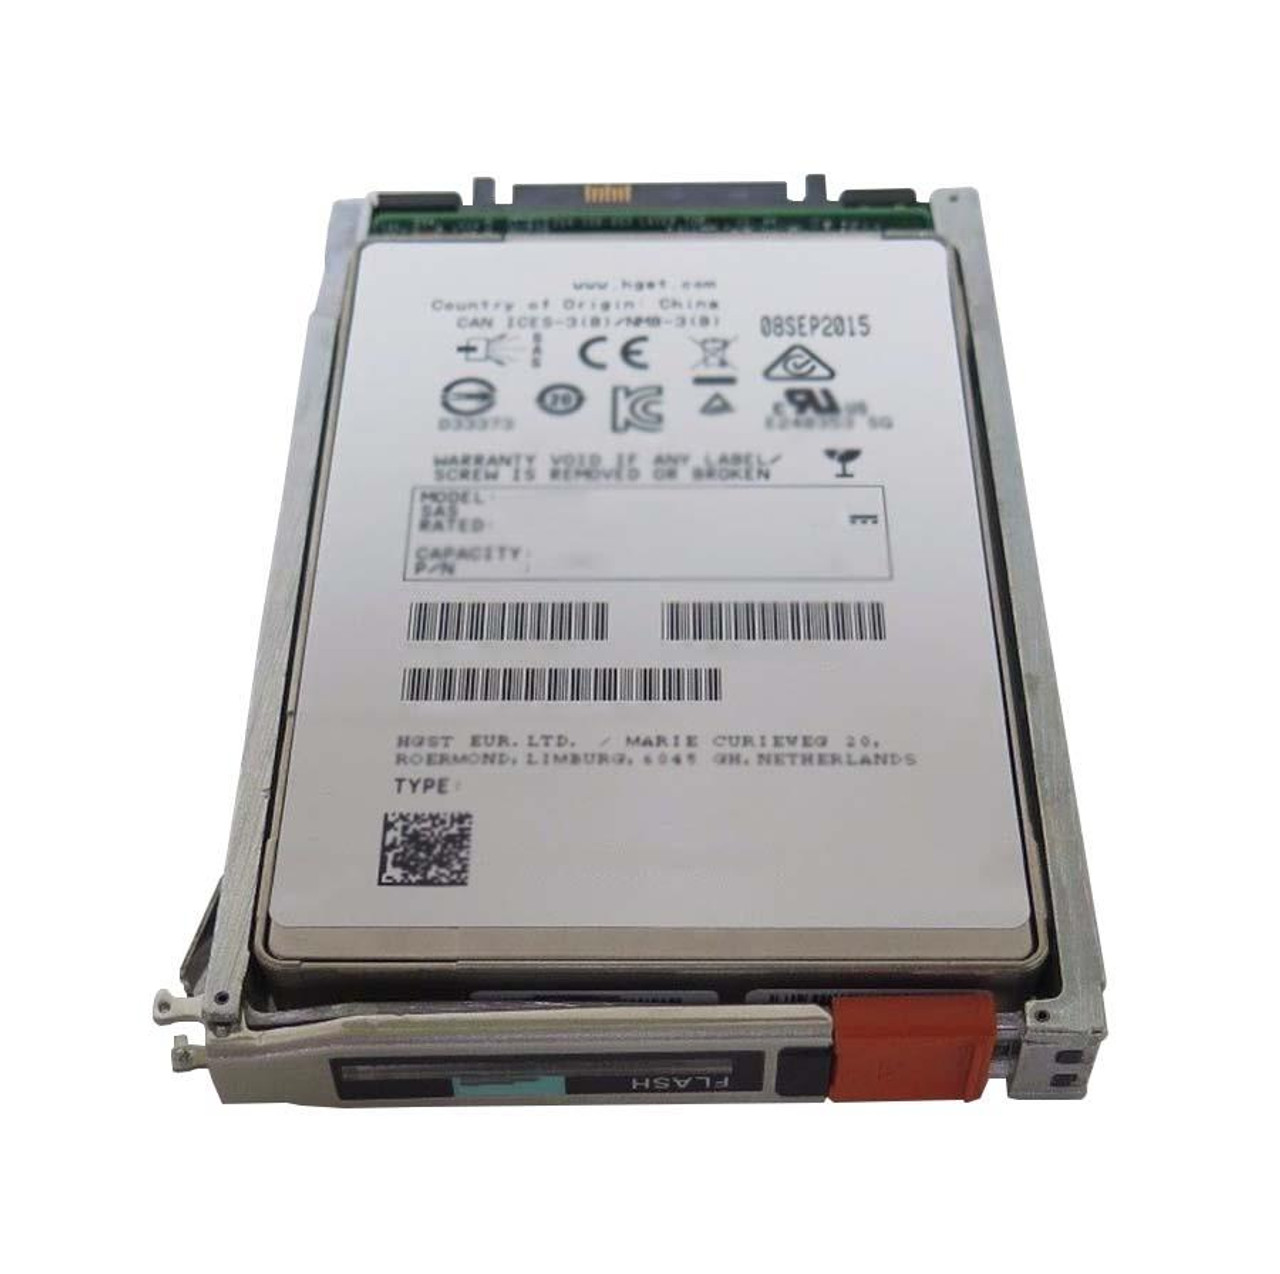 HL6FM2001BT2 EMC 200GB SAS 6Gbps 2.5-inch Internal Solid State Drive (SSD) with RAID1 for VMAX 400K